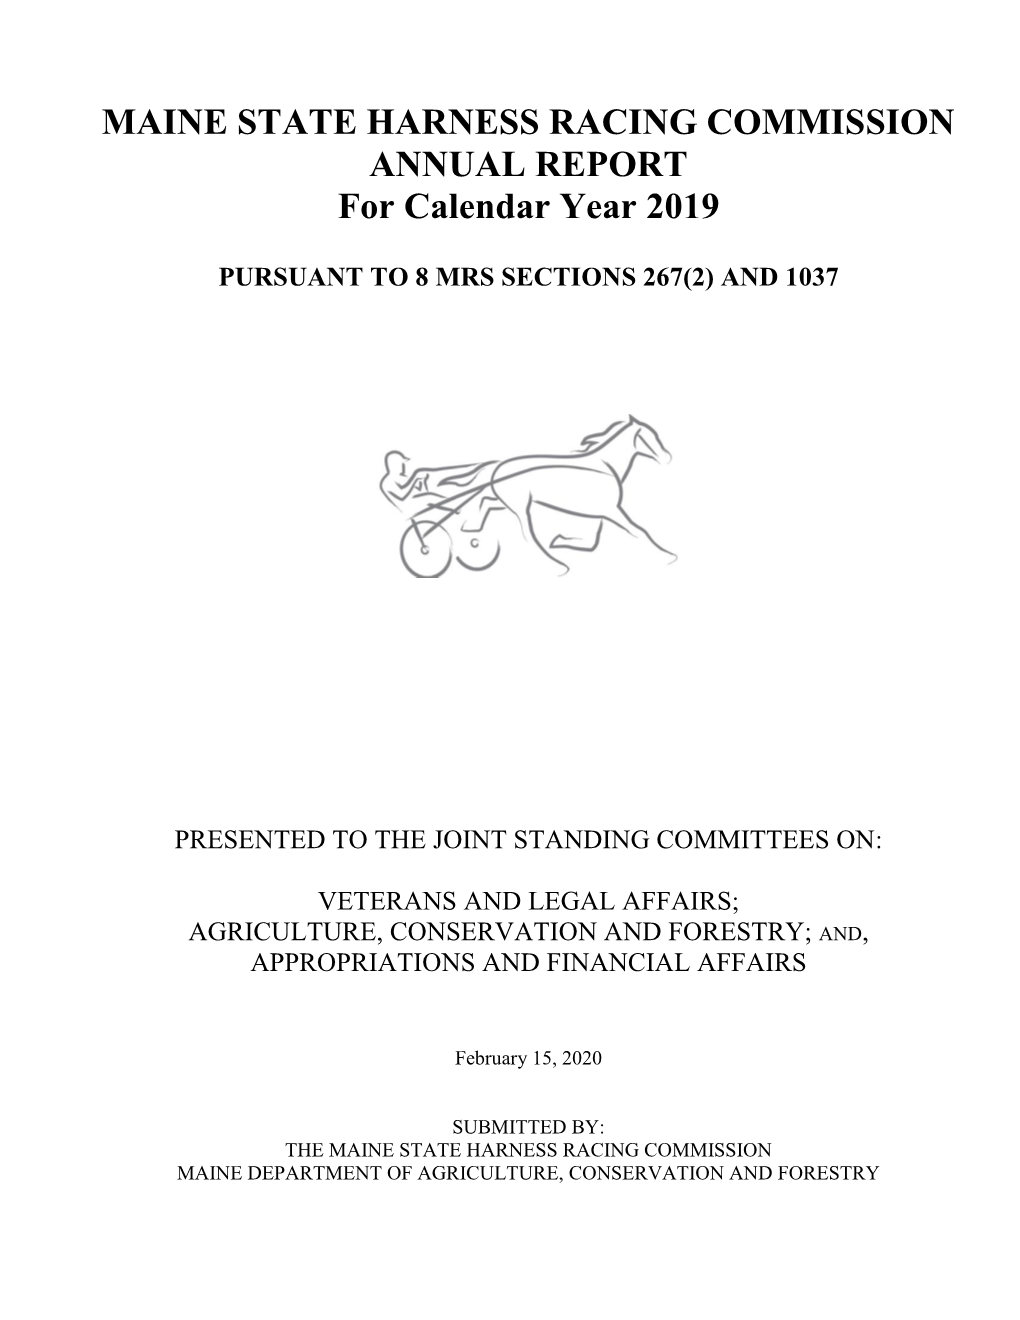 2019 Maine Harness Racing Commission Report